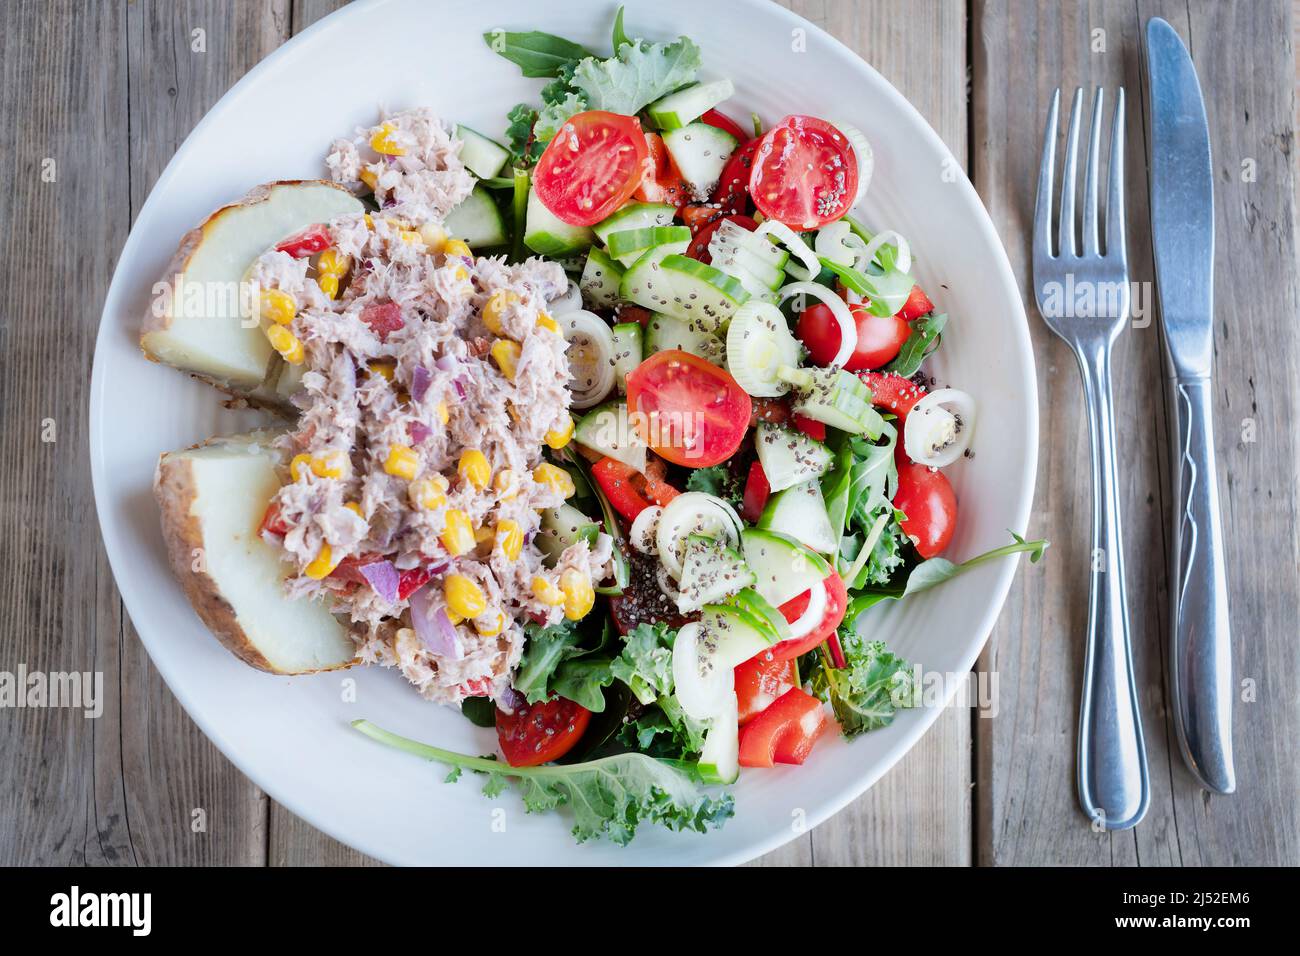 Tun, sweetcorn and mayonnaise served on half a jacket potato with a salad of mixed greens, tomatoes, cucumber and onions. A Mediterranean diet staple Stock Photo